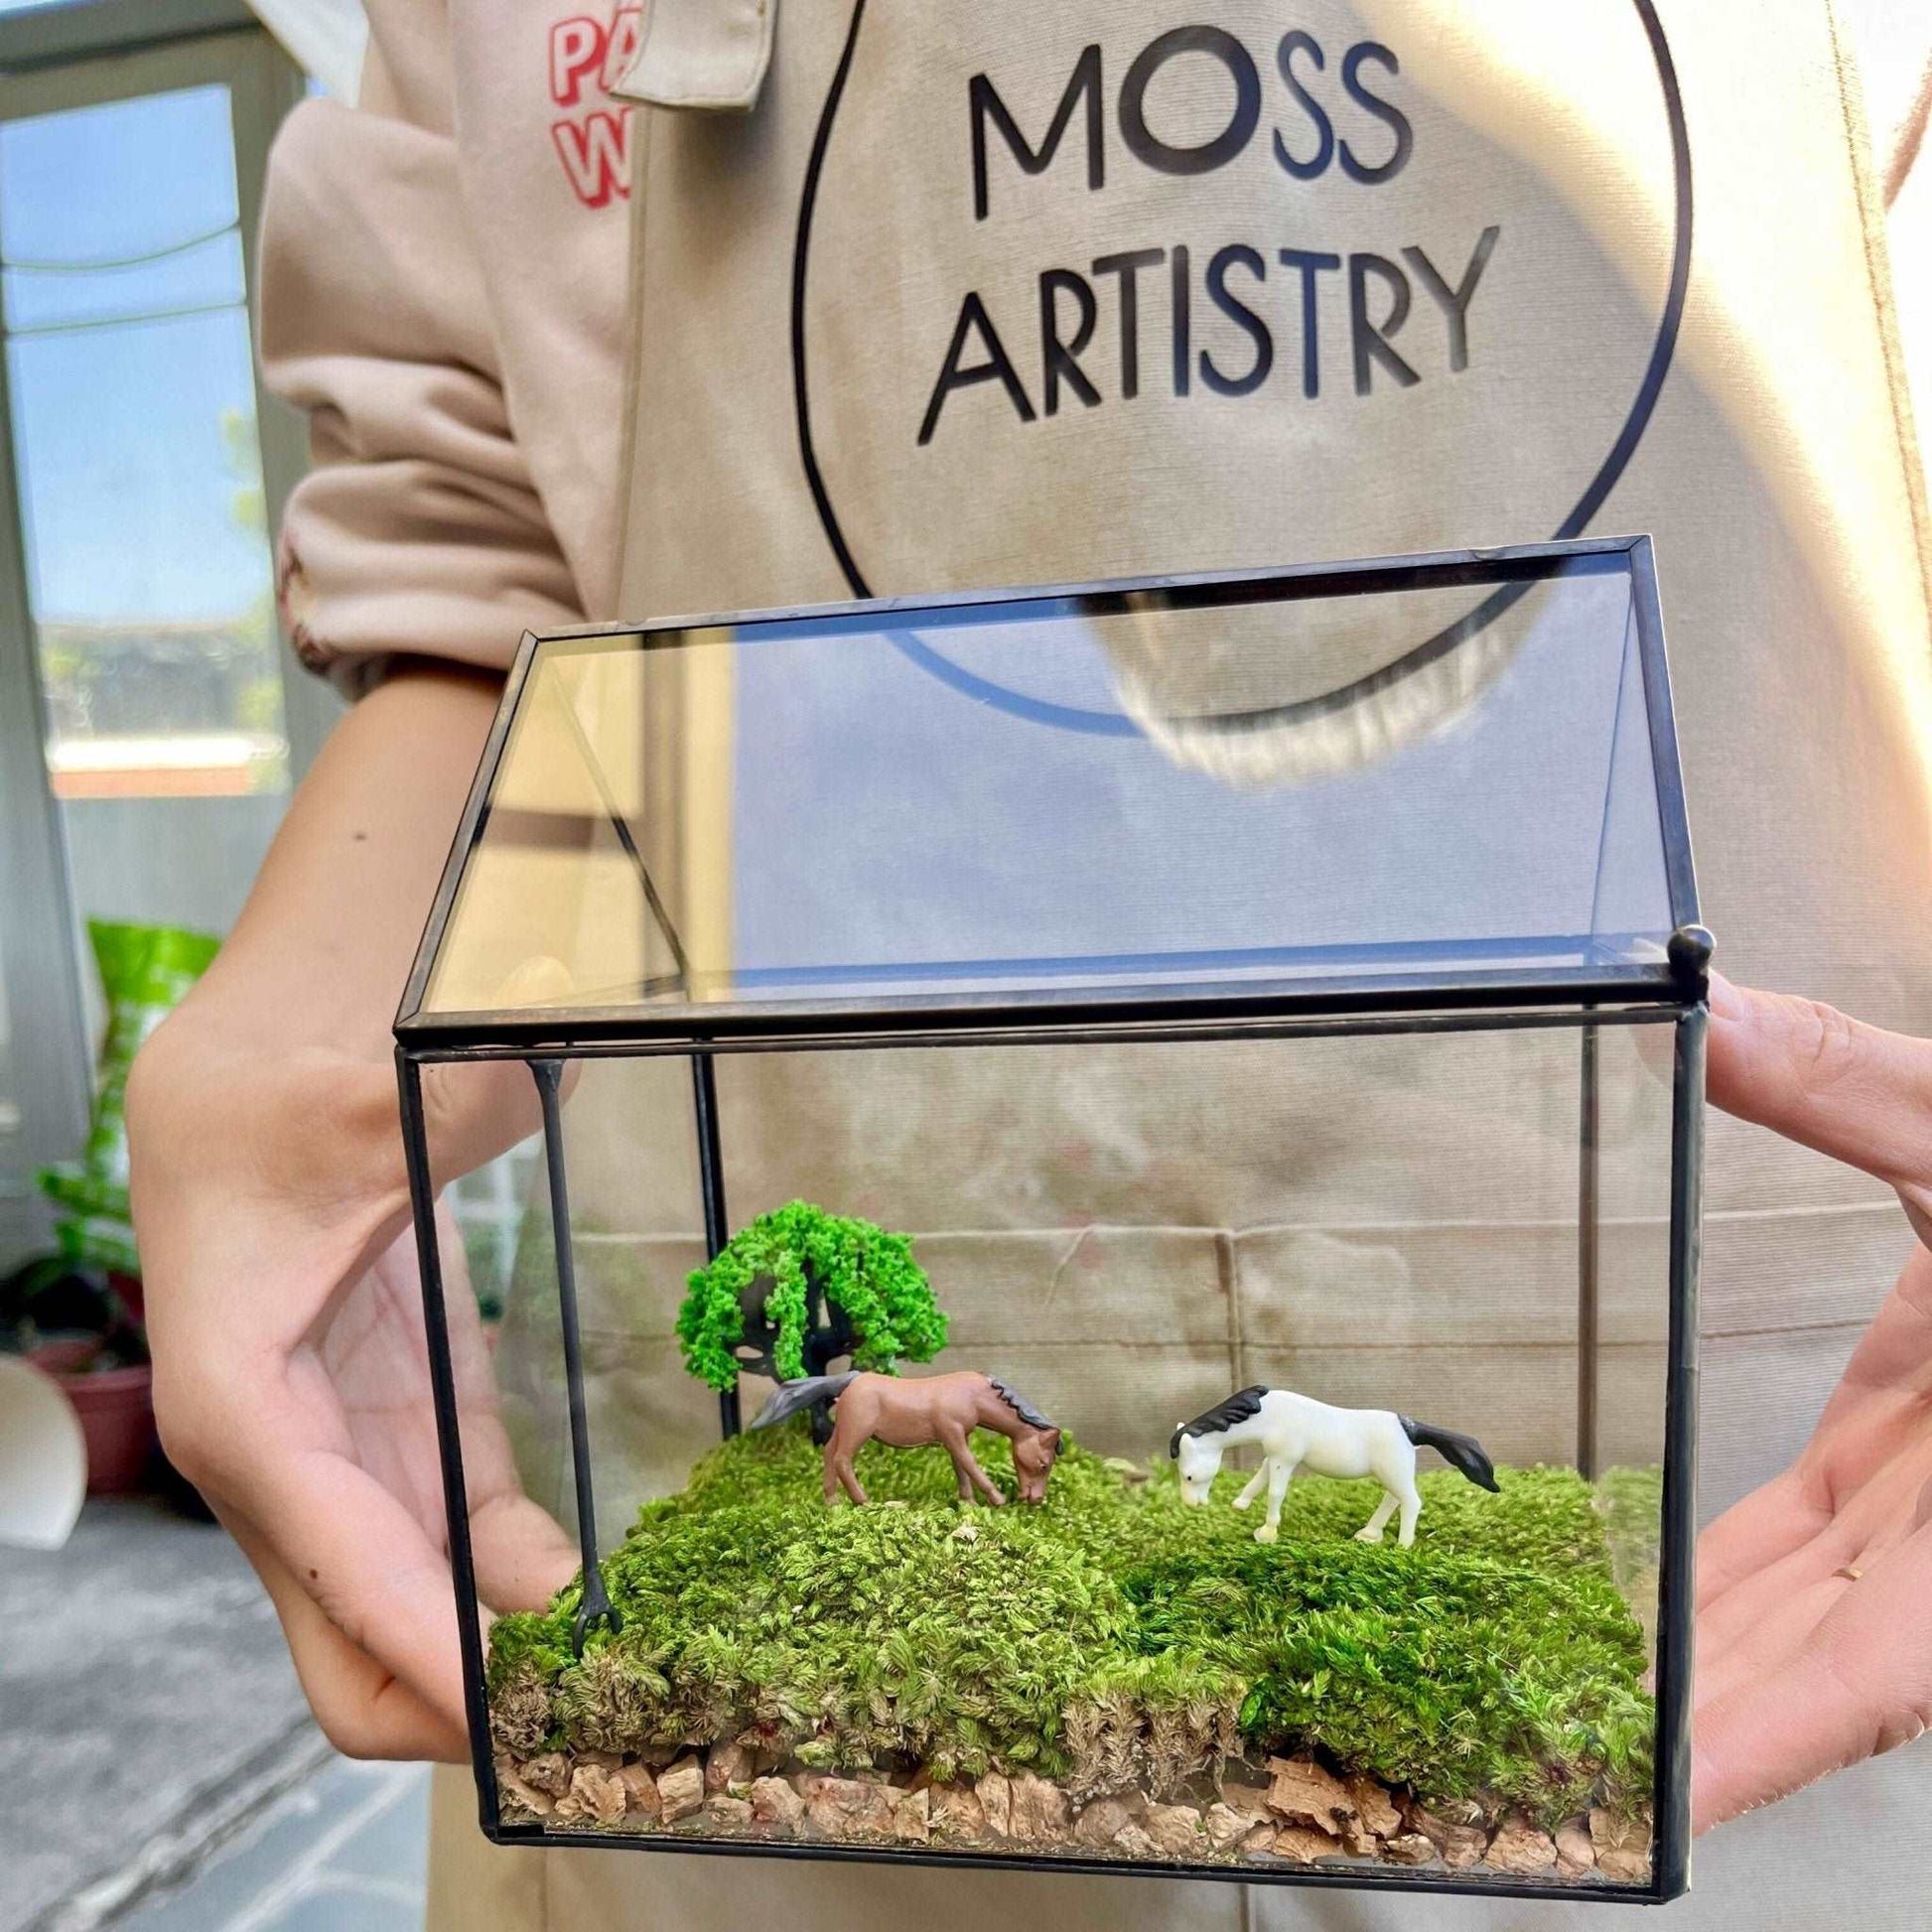 Tranquil Pasture Handmade Glass Terrarium - Miniature Equestrian LandsIntroduce a serene and picturesque scene to your workspace with our "Tranquil Pasture" Handmade Glass Terrarium - a Miniature Equestrian Landscape. This enchanting w